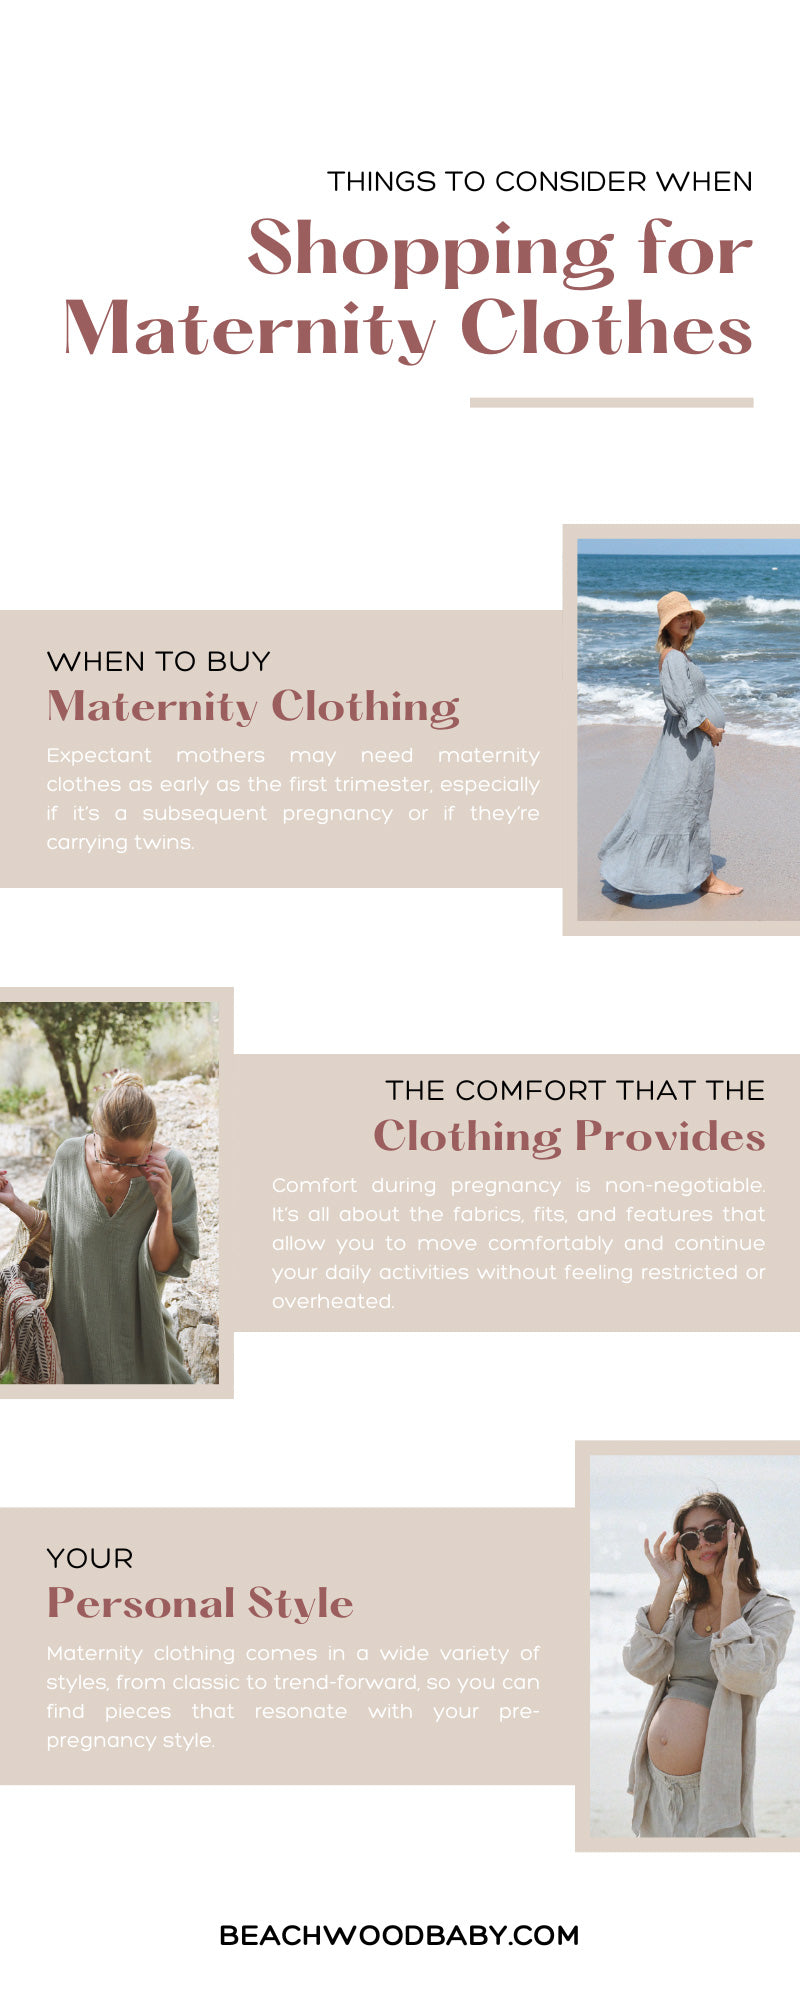 Things To Consider When Shopping for Maternity Clothes